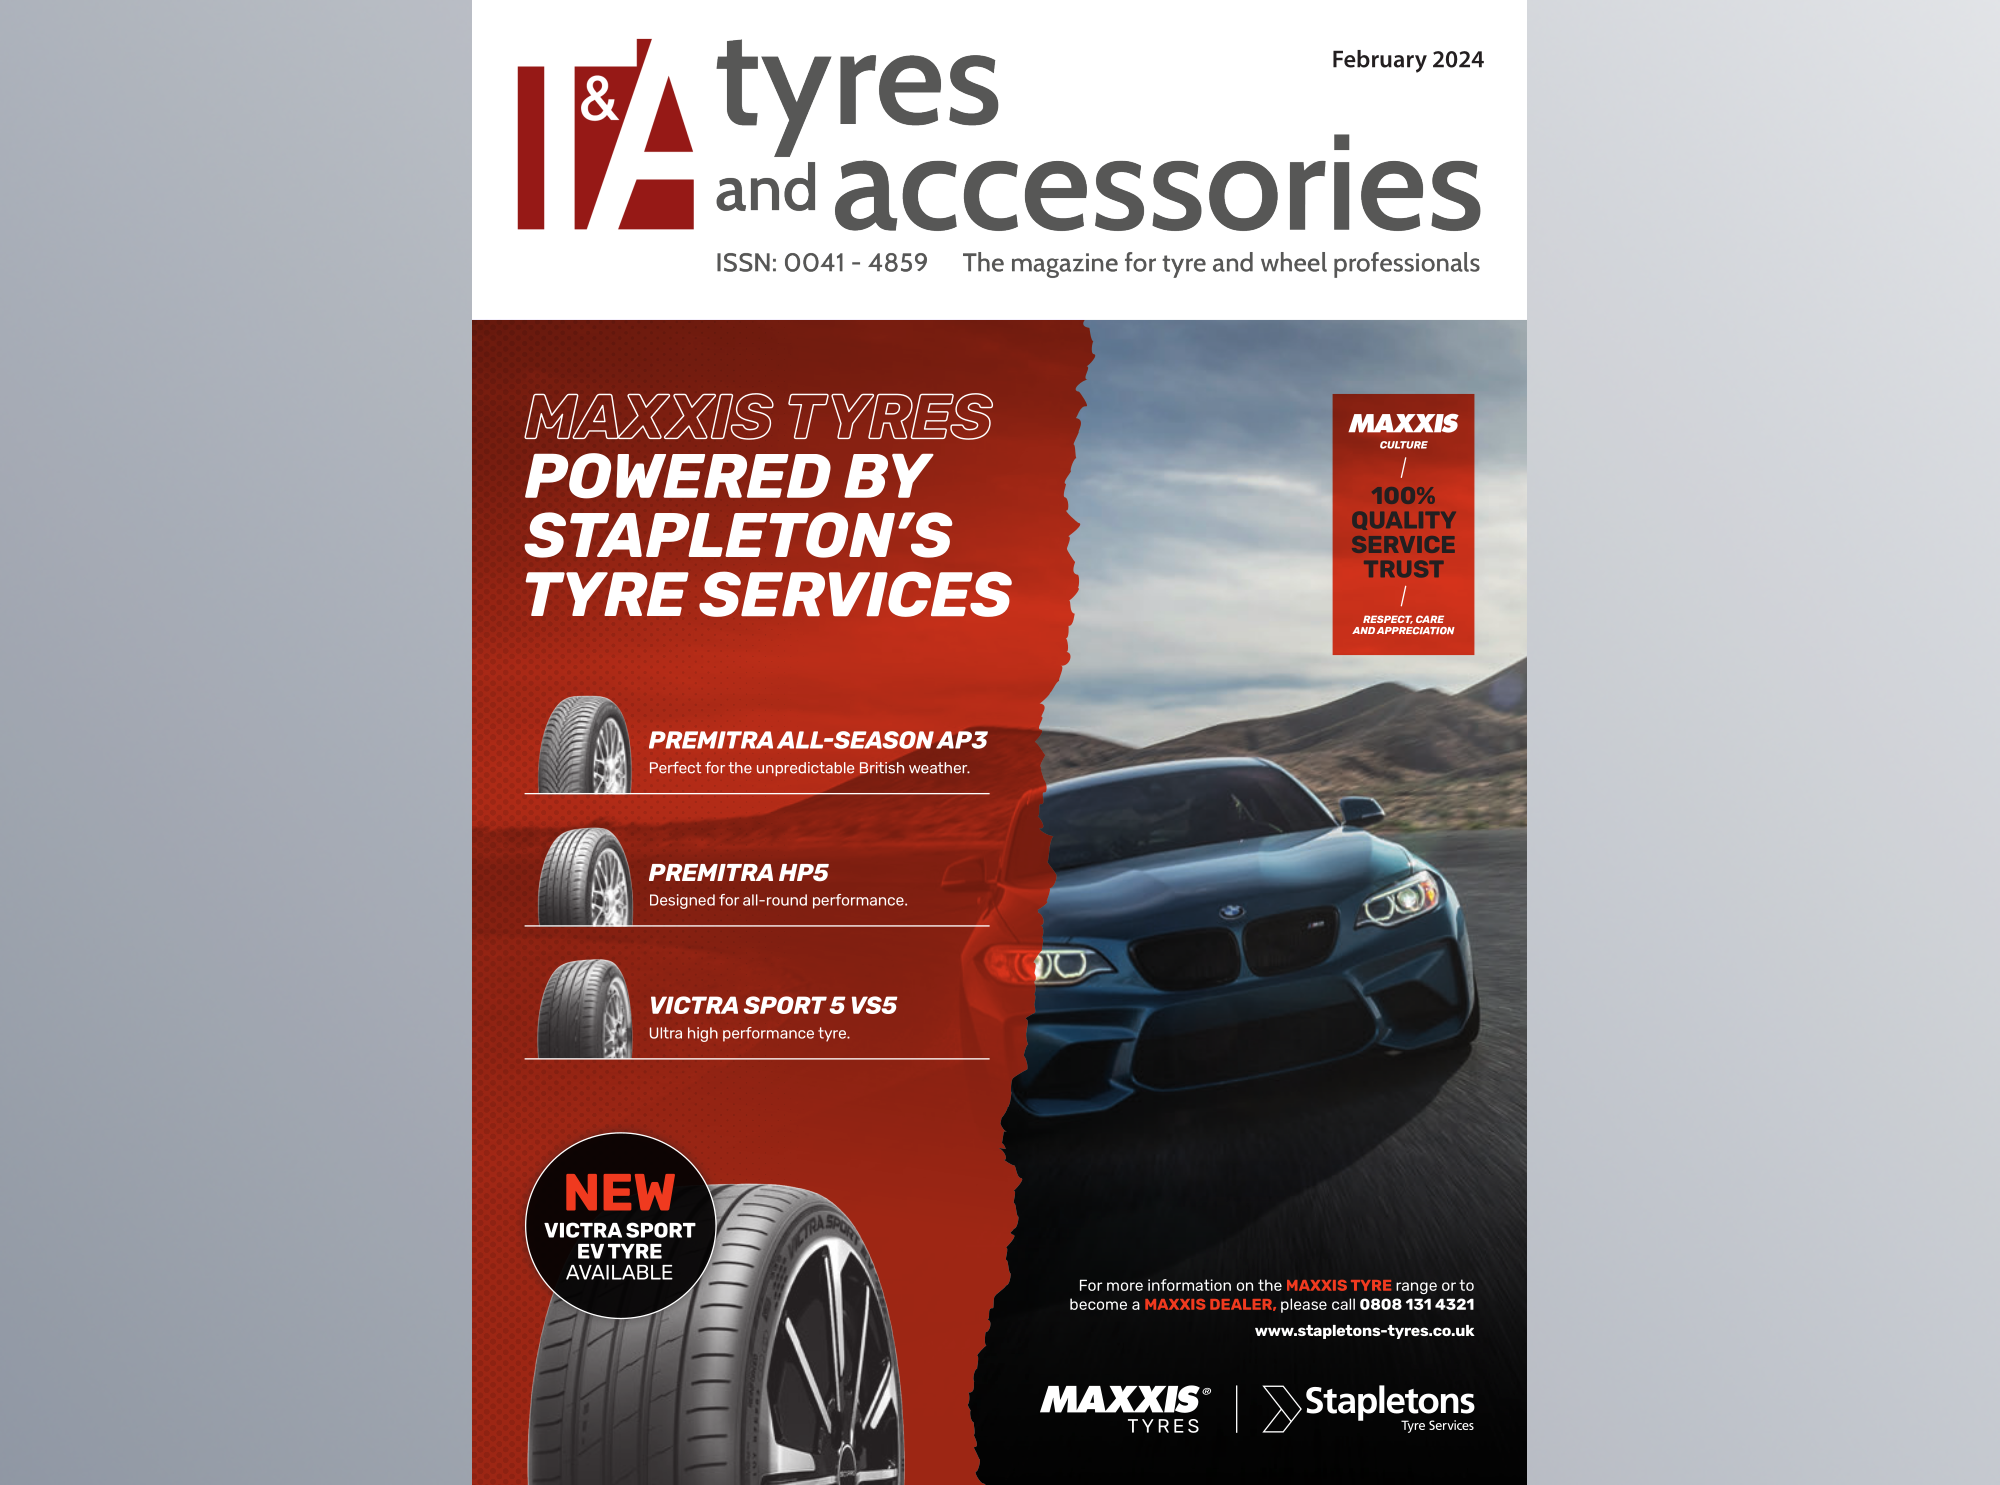 Tyres & Accessories February 2024 issue now available to read online, download